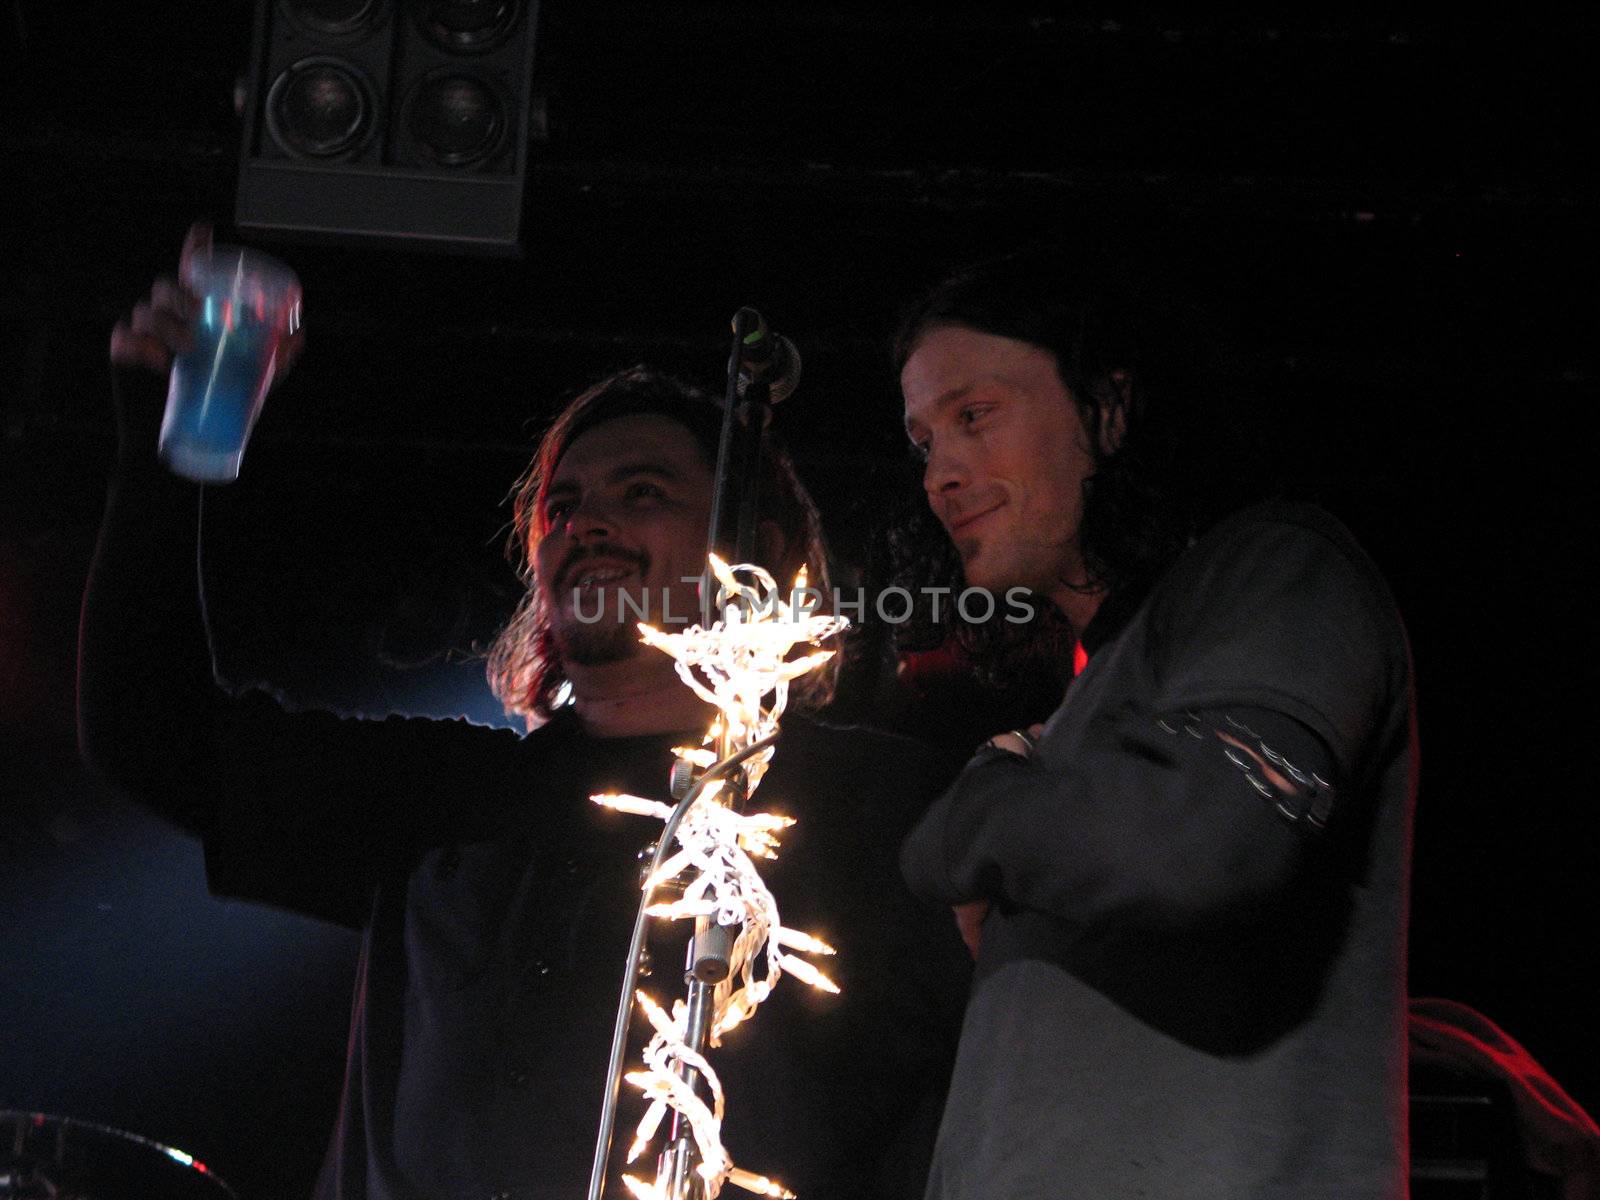 shaun morgan of seether singing a duet with jonny hetherington of art of dying in england by mmm